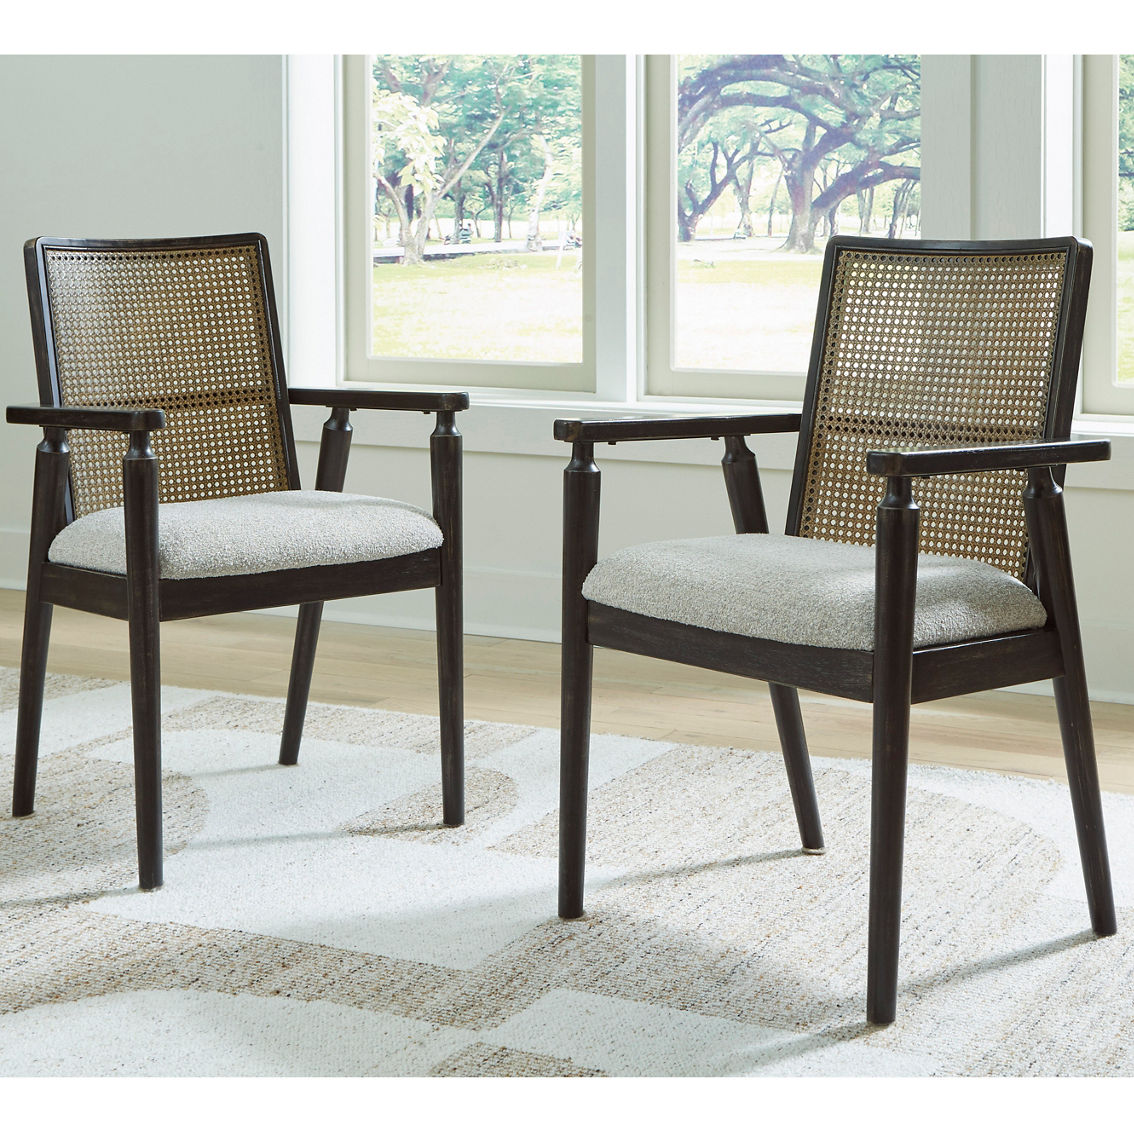 Signature Design by Ashley Galliden 7 pc. Dining Set: Table, 6 Arm Chairs - Image 3 of 6